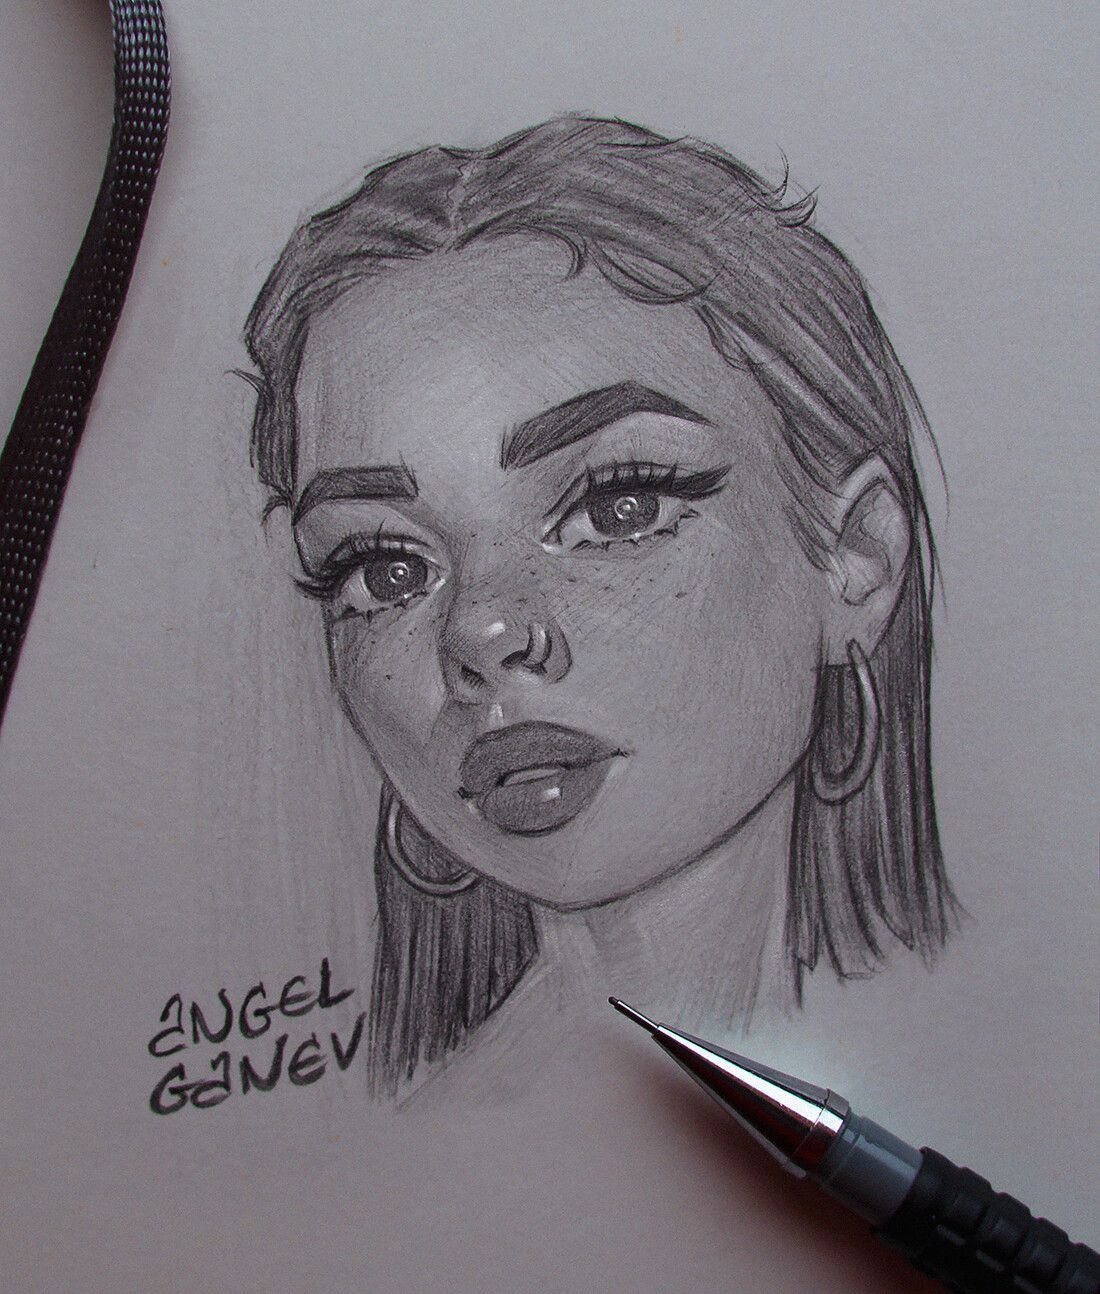 Pencil Sketches ?, Angel Ganev - Pencil Sketches ?, Angel Ganev -   17 beauty Art sketches ideas